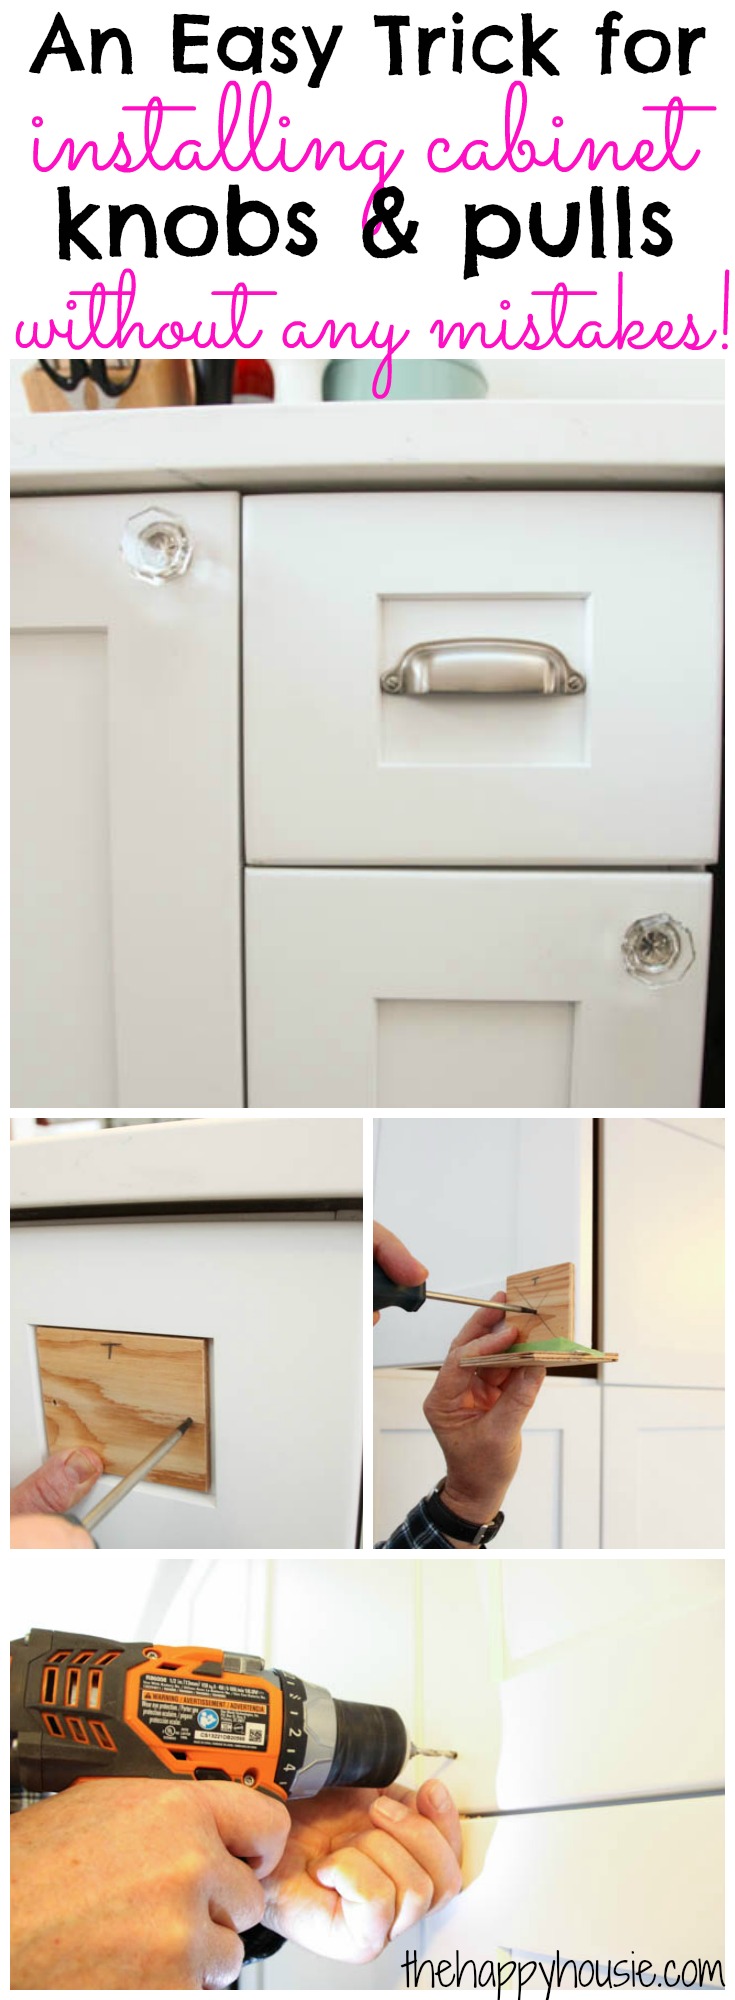 An Easy Trick for installing cabinet knobs and pulls without making any mistakes at The Happy Housie poster.